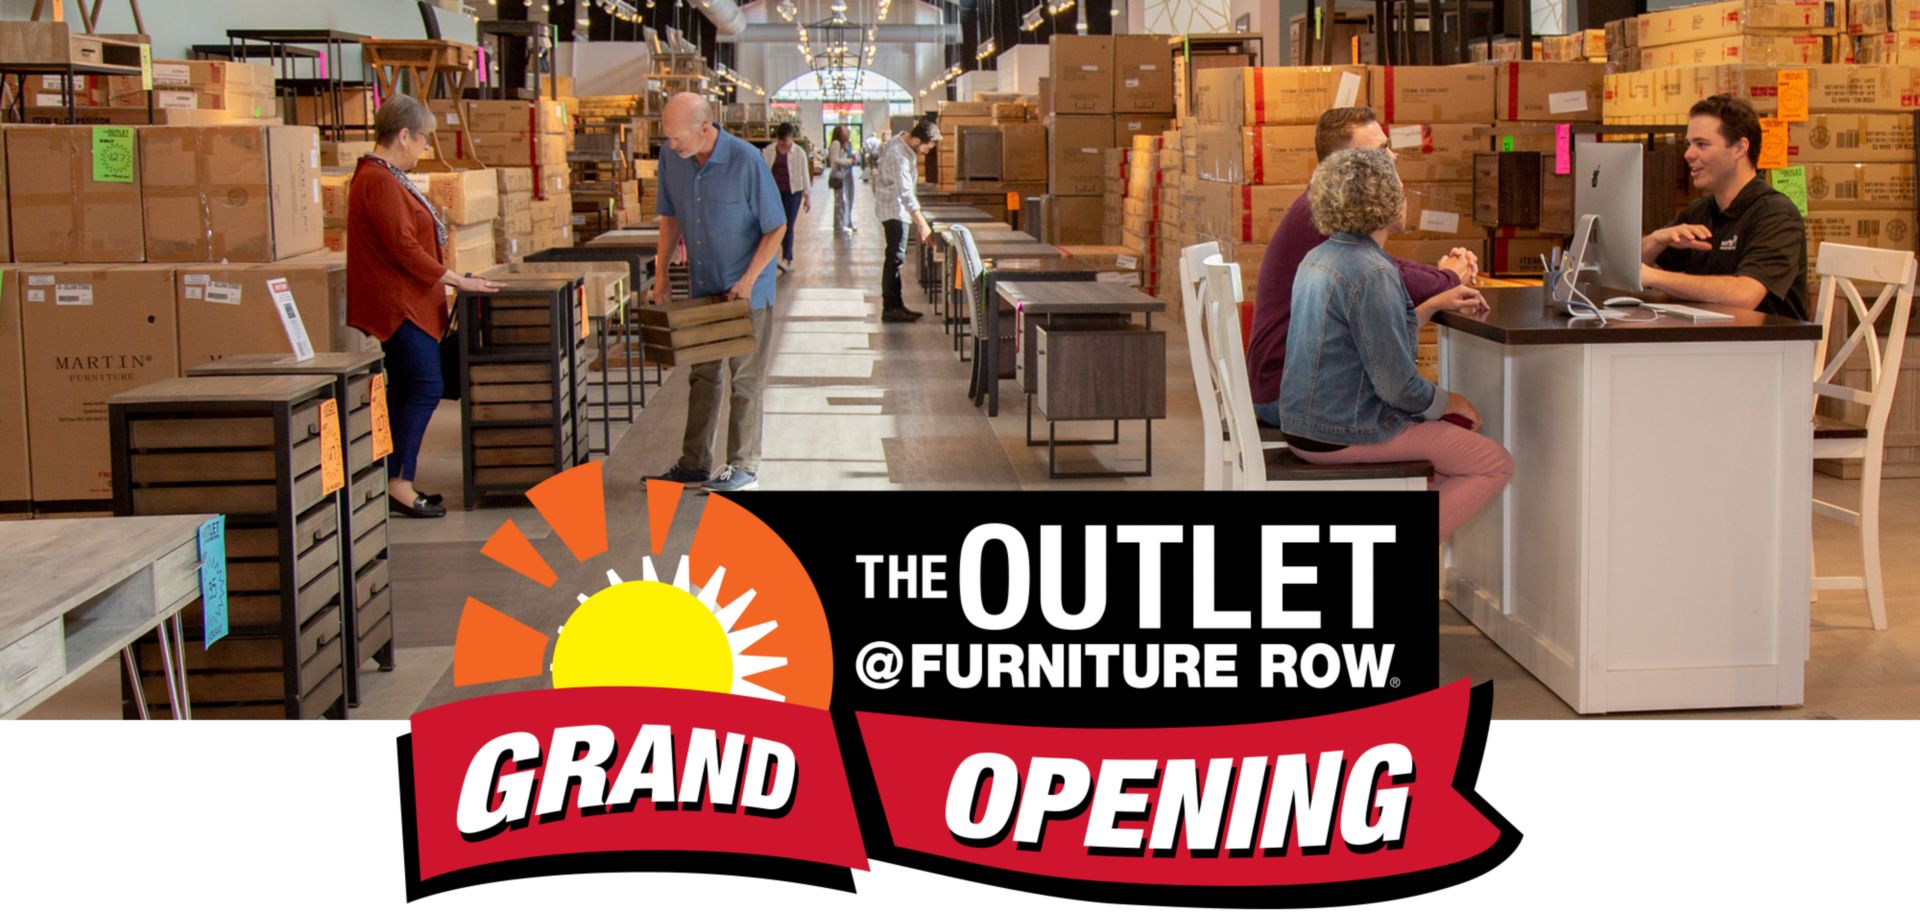 The Outlet at Furniture Row Grand Opening 